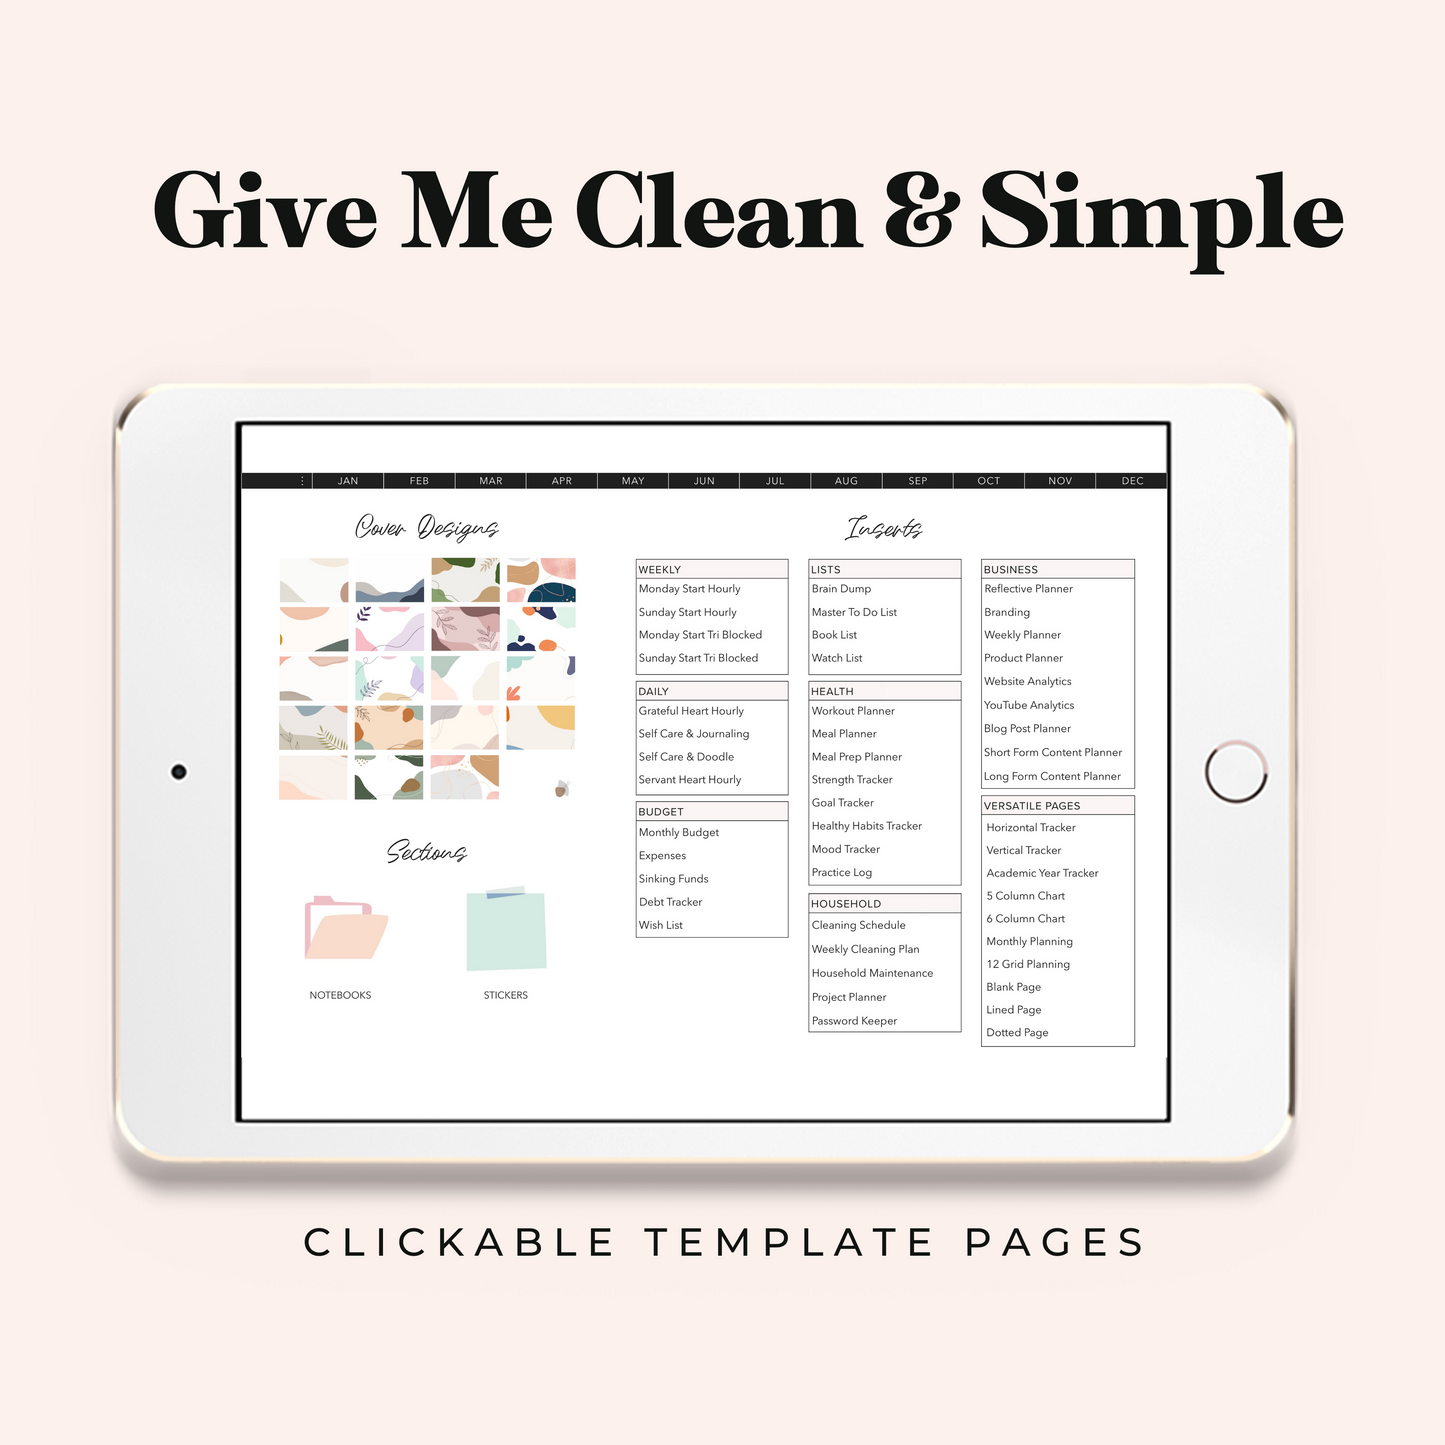 Give Me Clean and Simple Digital 2024 Planner for Ipad Planning